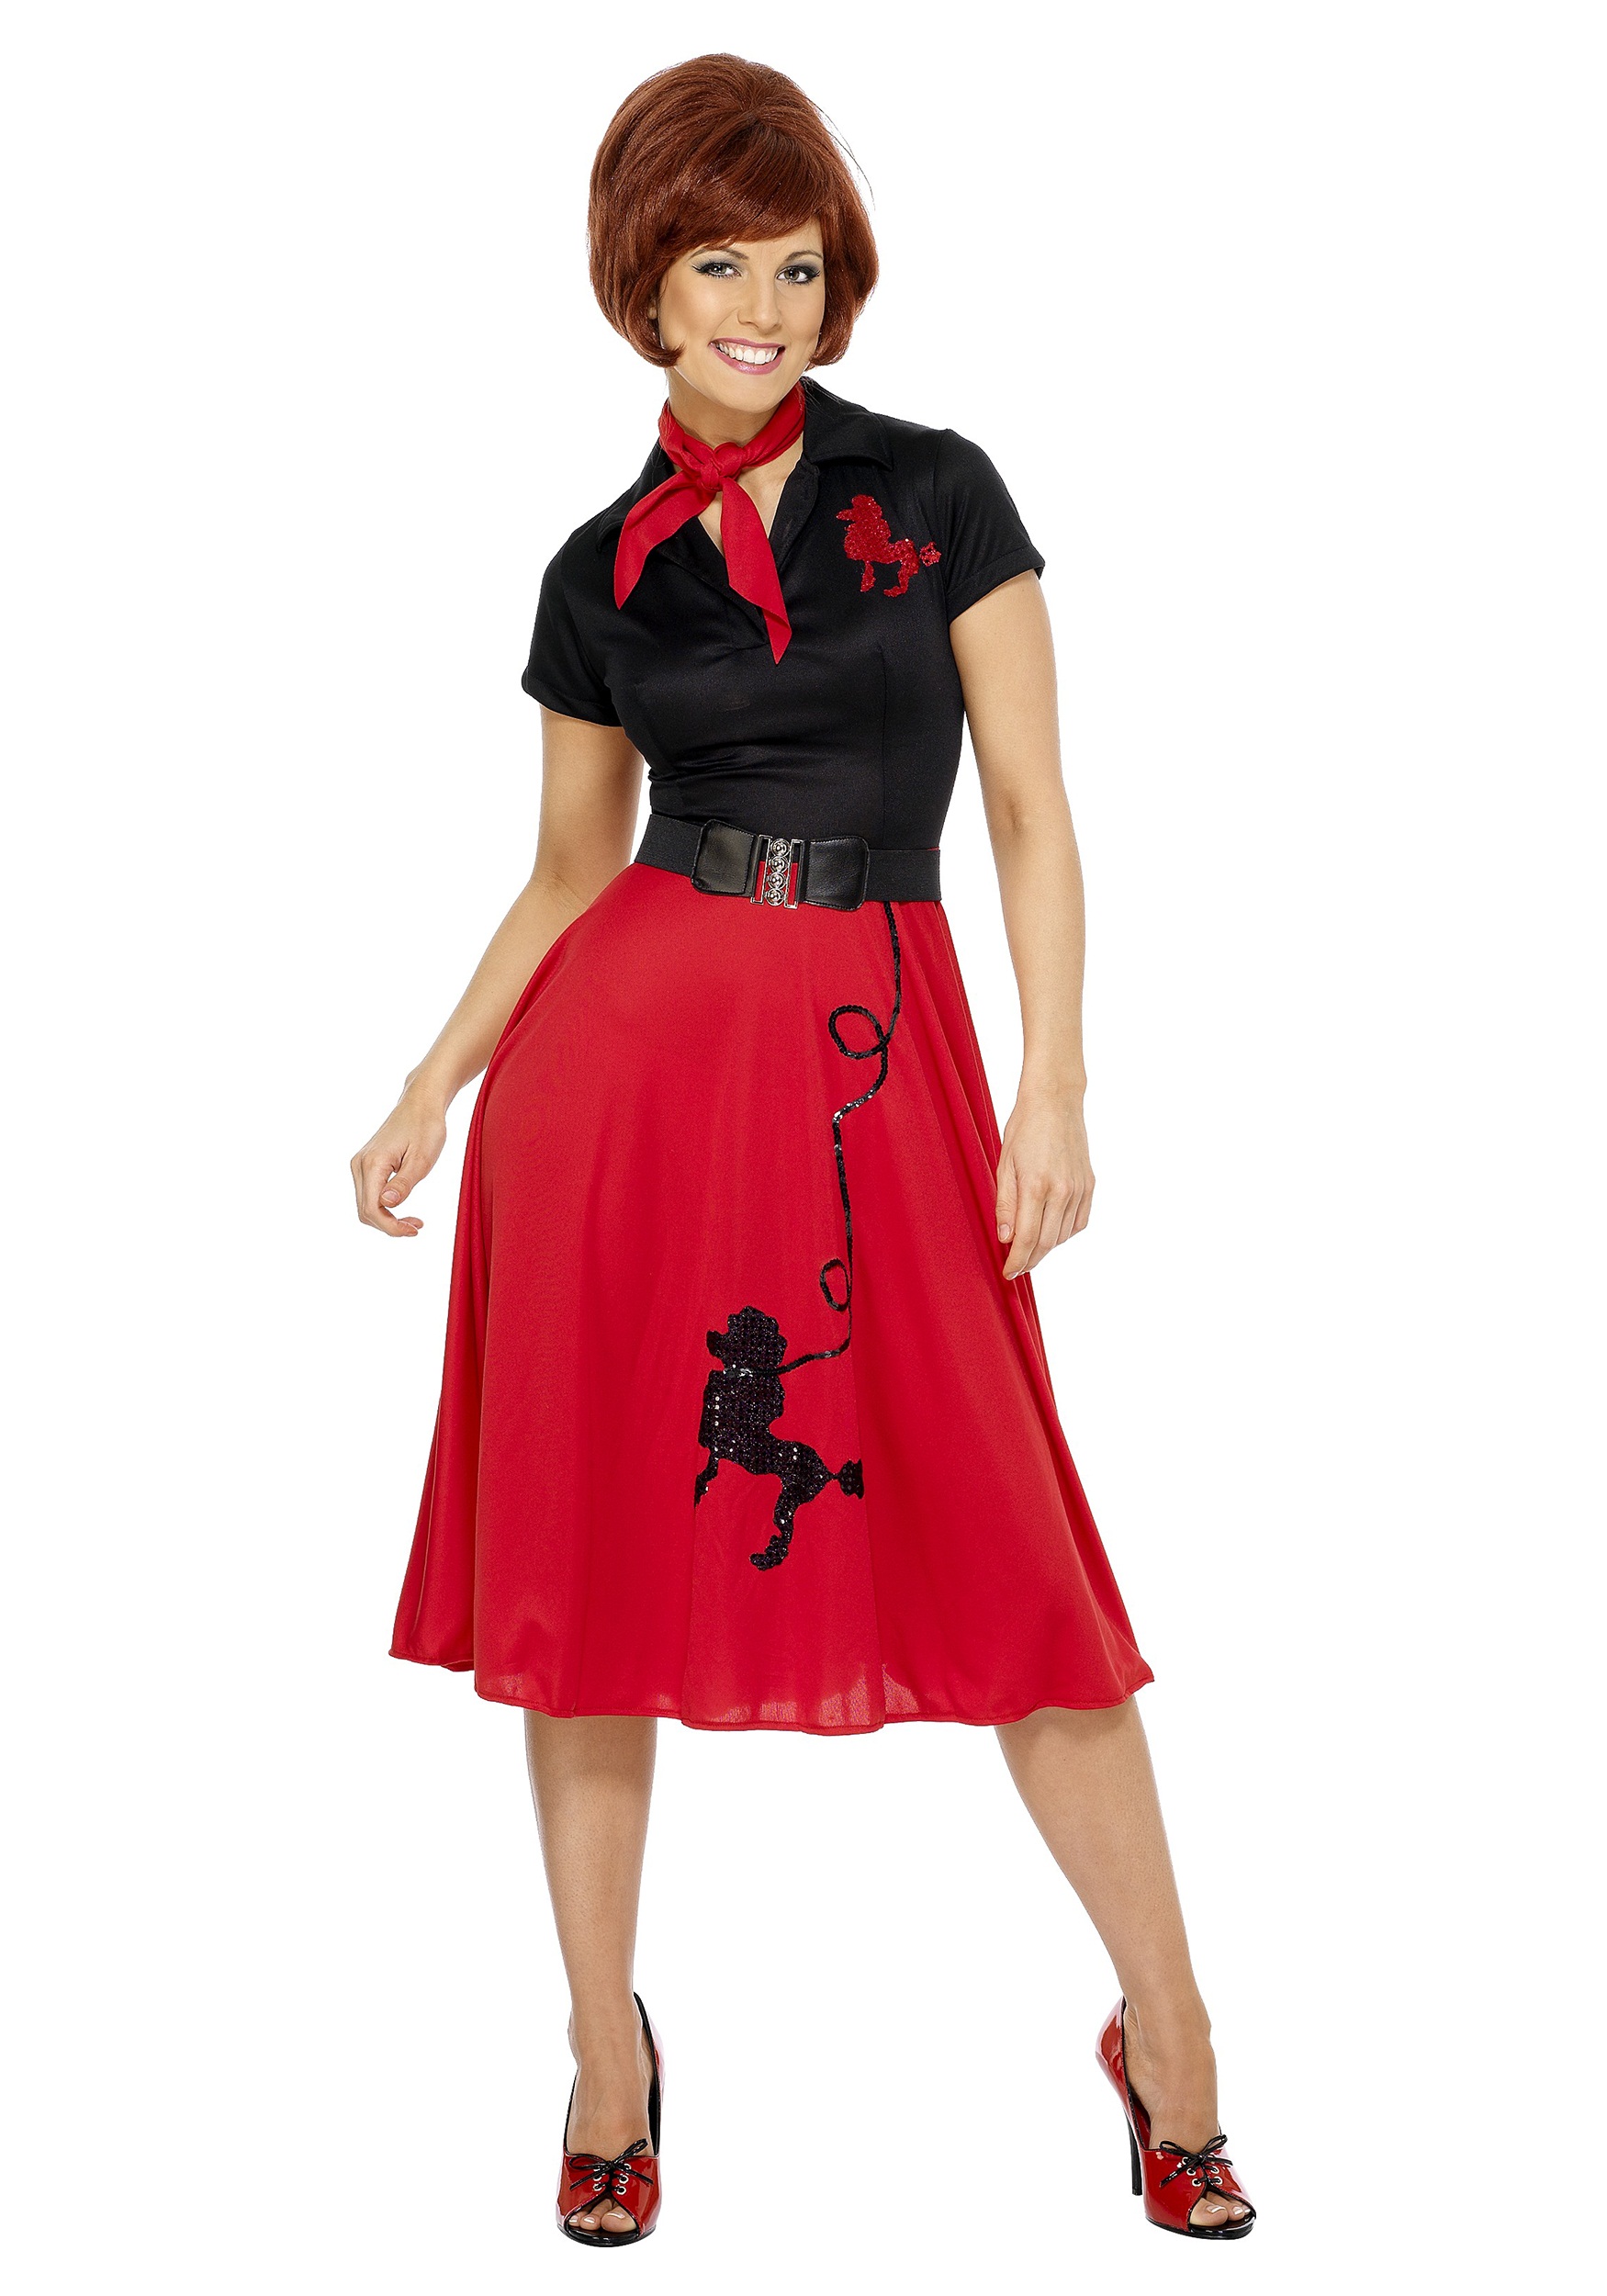 50s Style Poodle Costume for Women